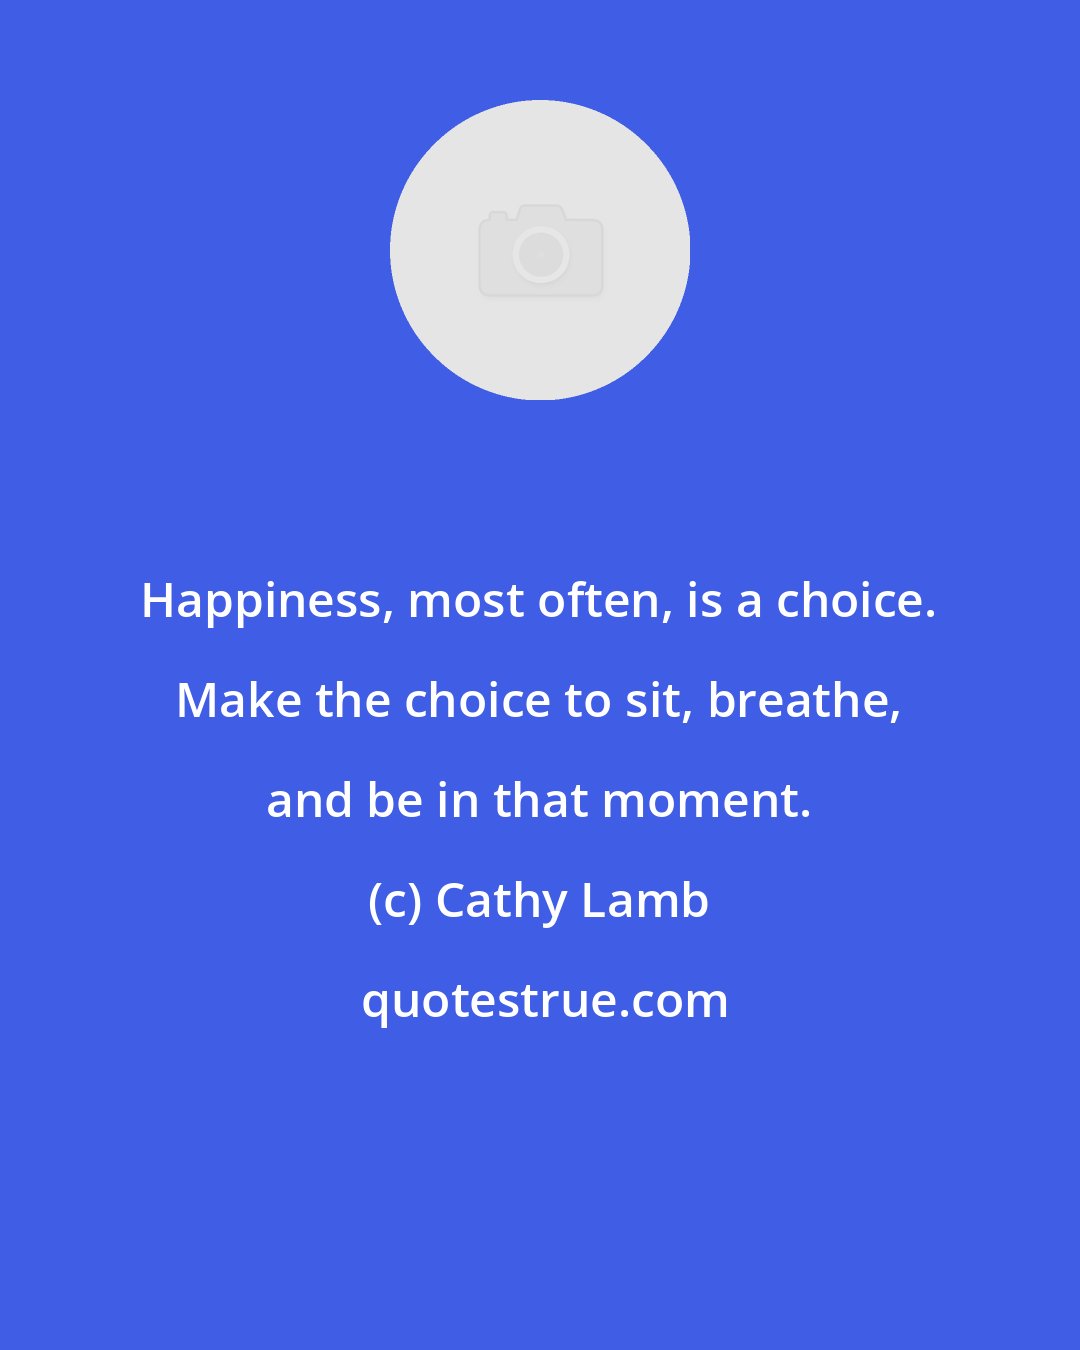 Cathy Lamb: Happiness, most often, is a choice. Make the choice to sit, breathe, and be in that moment.